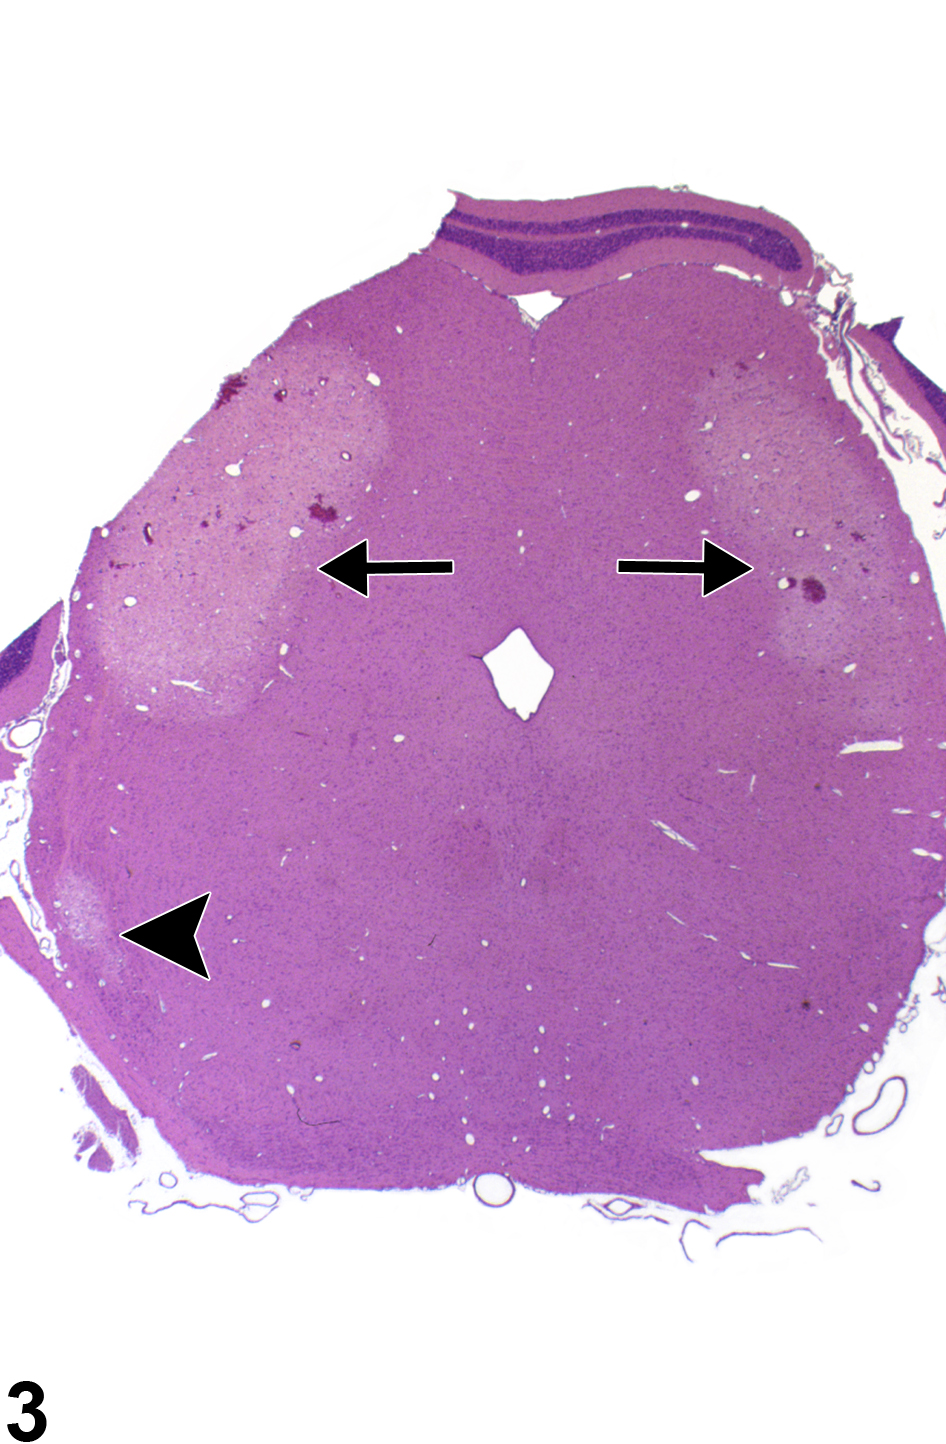 Image of necrosis in the brain from a male F344/N rat in an acute study